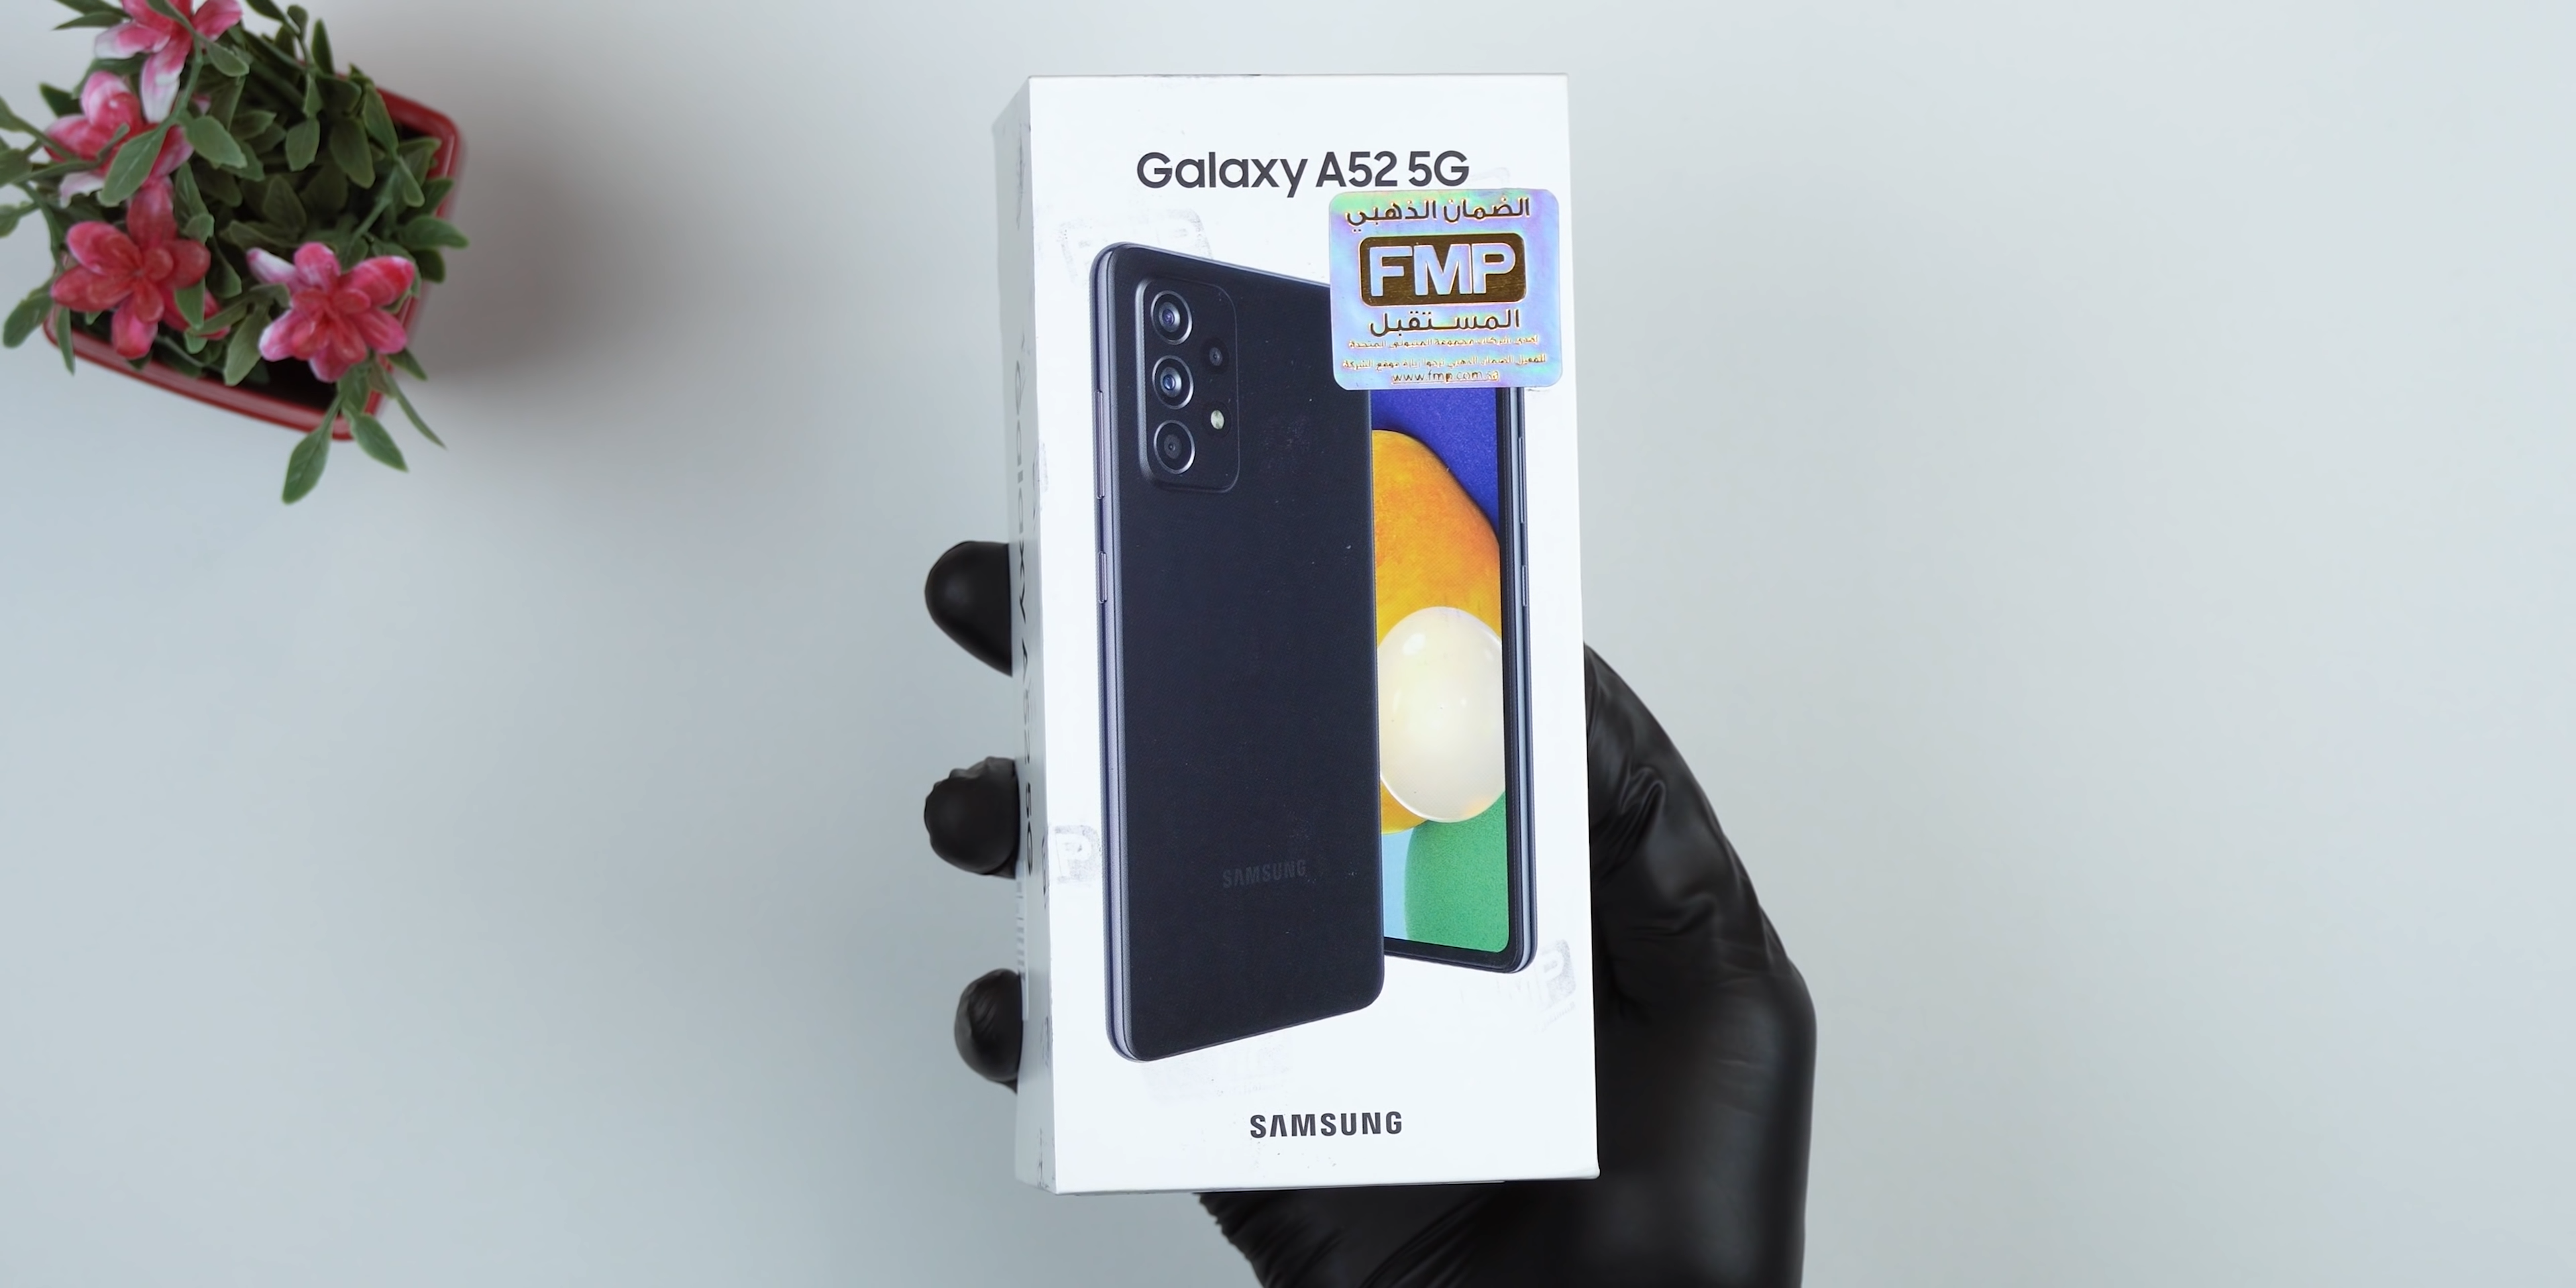 Samsung Galaxy A52 5G early unboxing video reveals in-box contents, camera features, & more